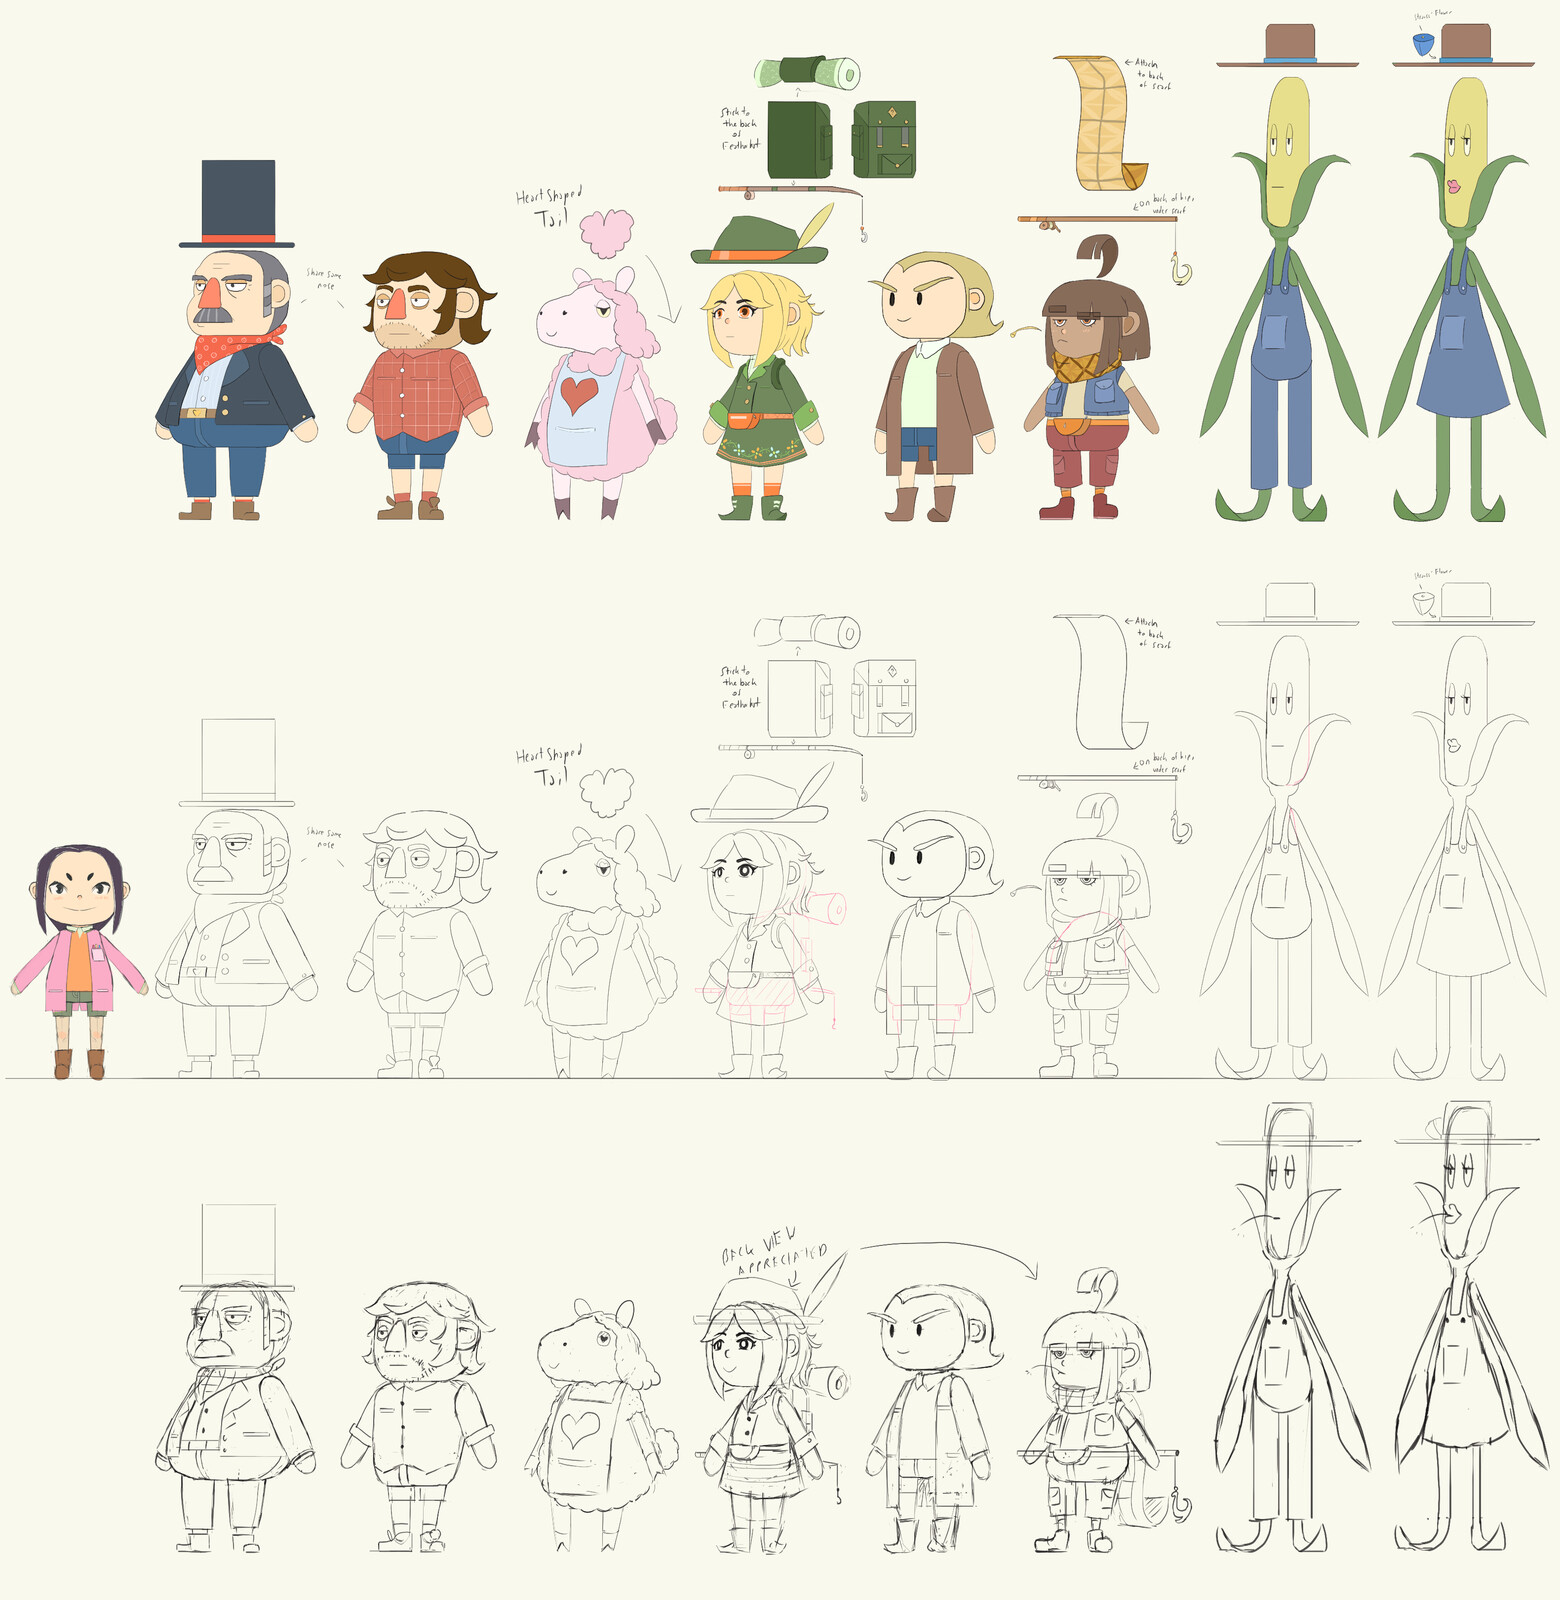 Farm Planet NPCs
After 3D modeler (Ann Helen Lorensten) familiarized self with Iyo's proportions, a 3/4 view was all that was needed to get the characters done in 3D.
